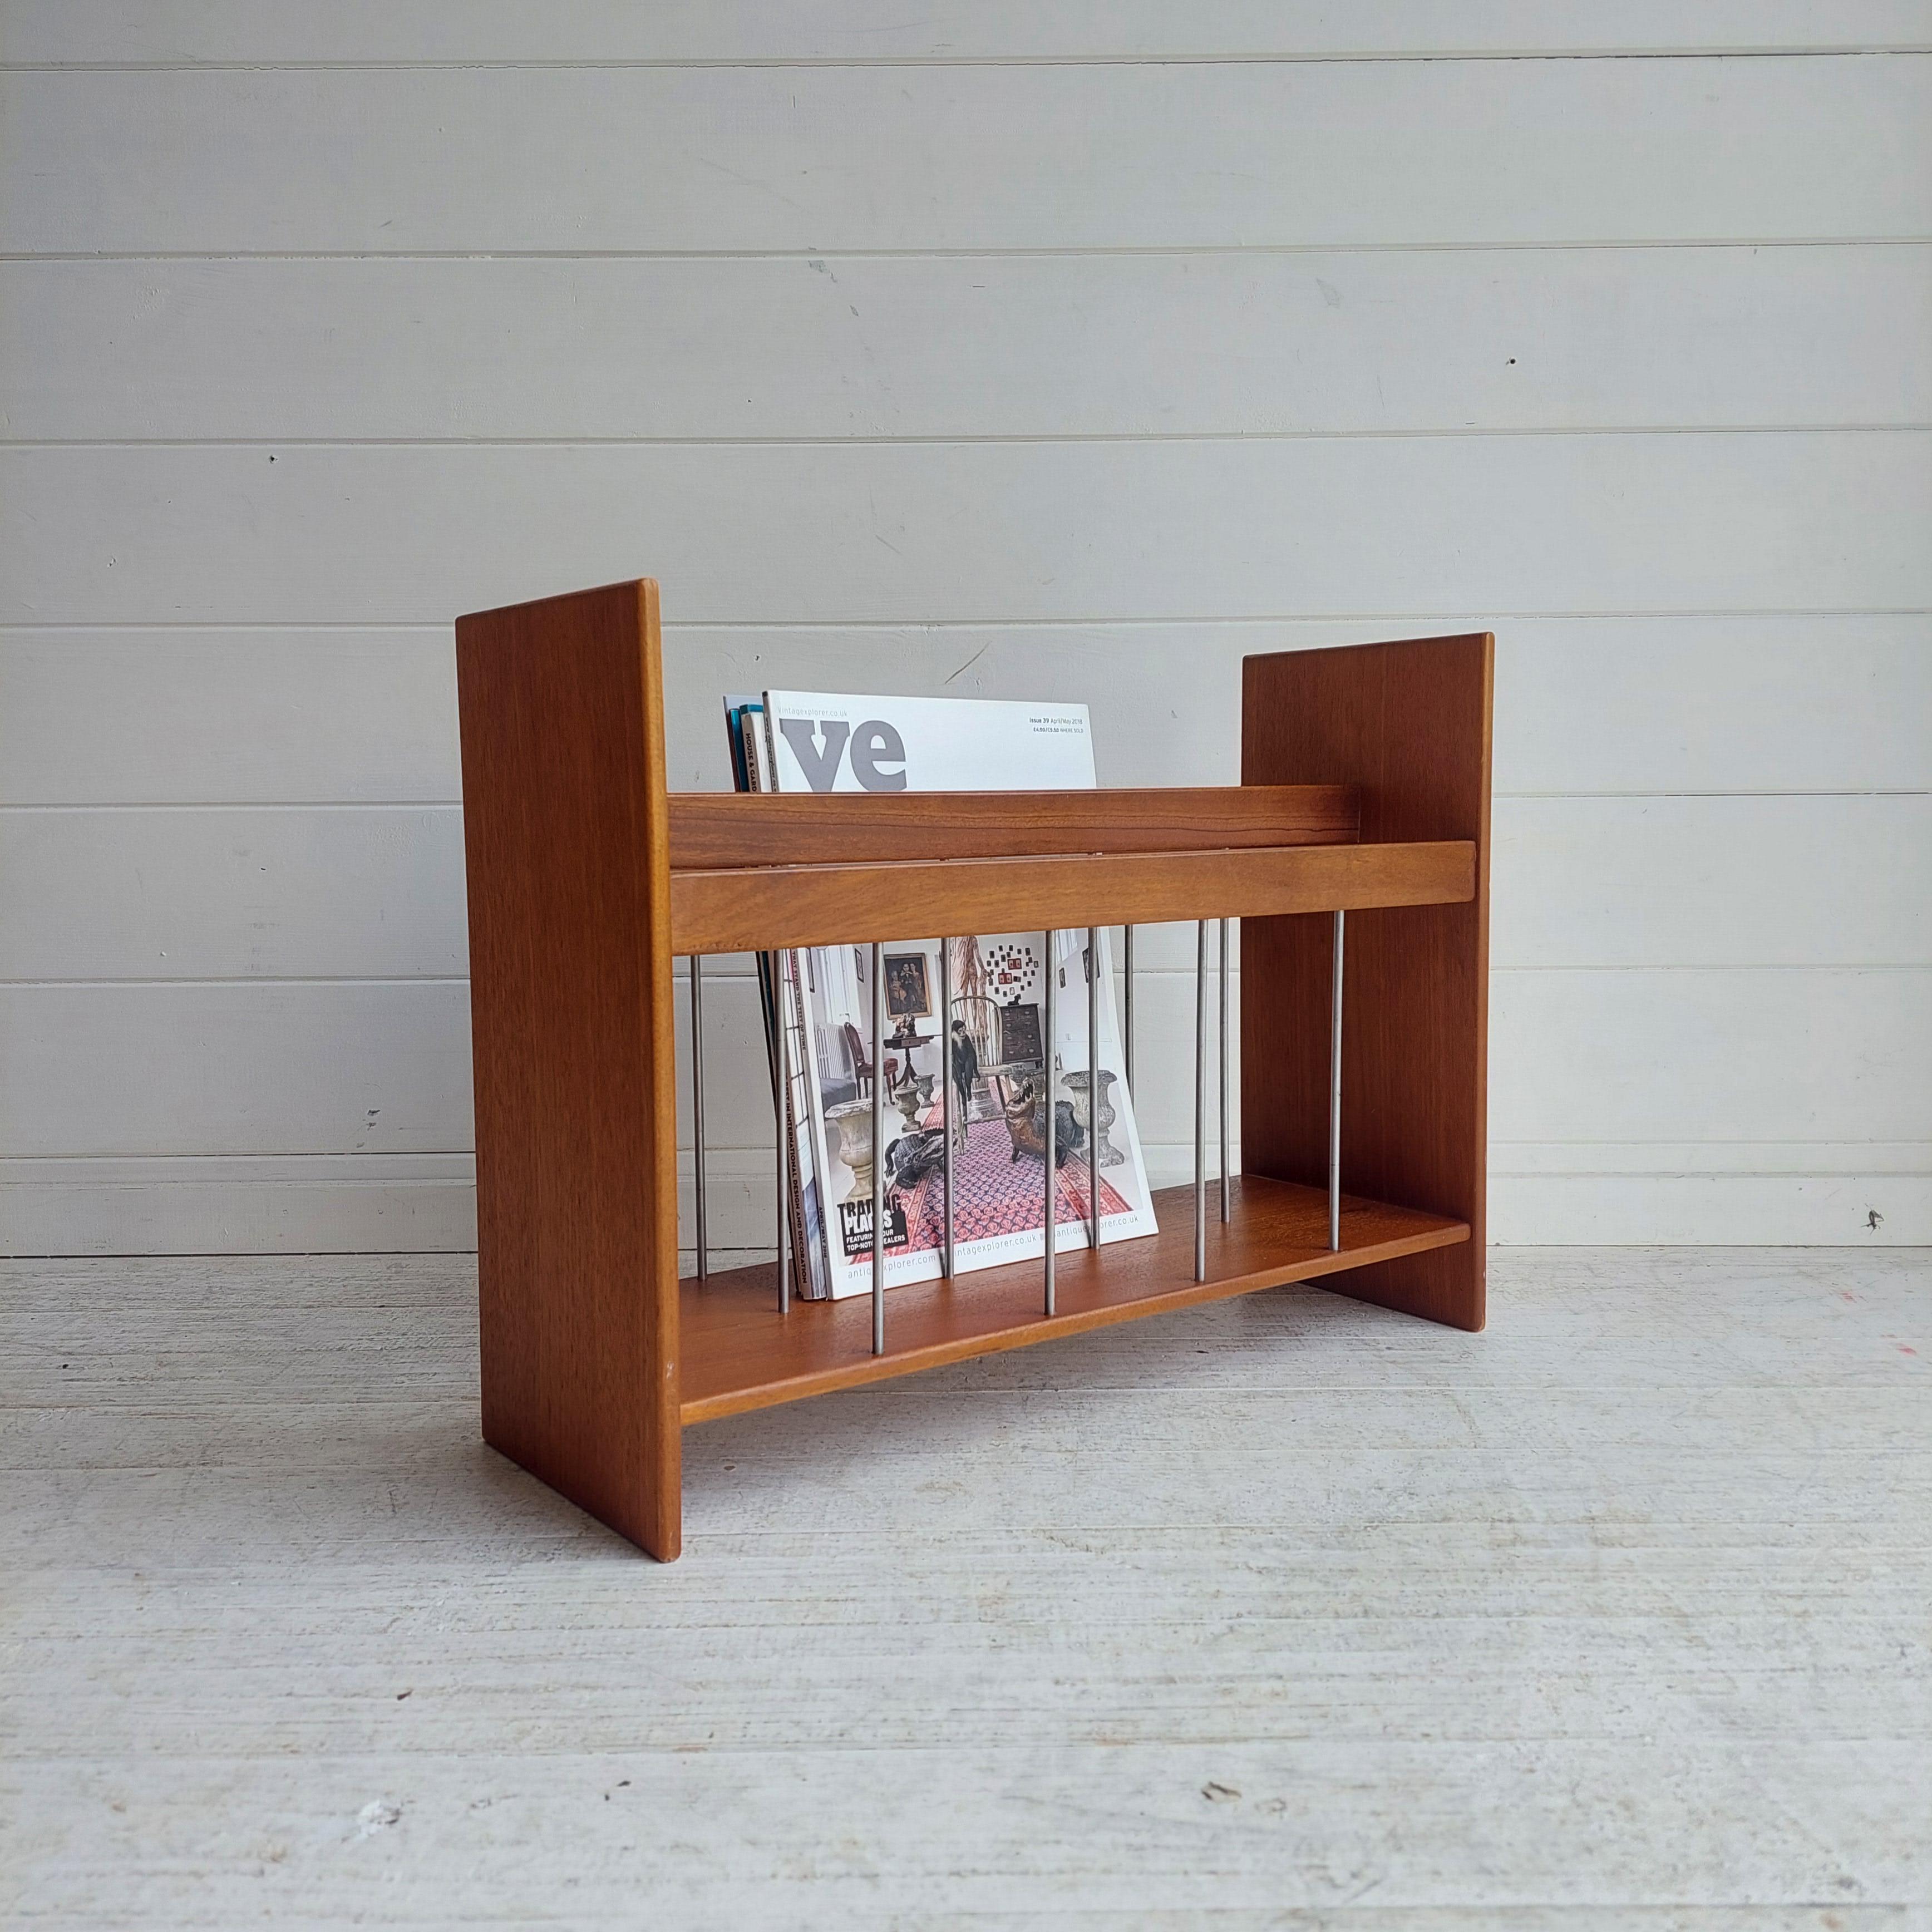 Stunning 1960s teak, Danish magazine rack.
A minimalist design, constructed of teak wood with metal supports. 
Would suit both vintage inspired and contemporary interiors. 
Manufactured in Denmark, circa 1960's.

A lovely quality solid teak magazine